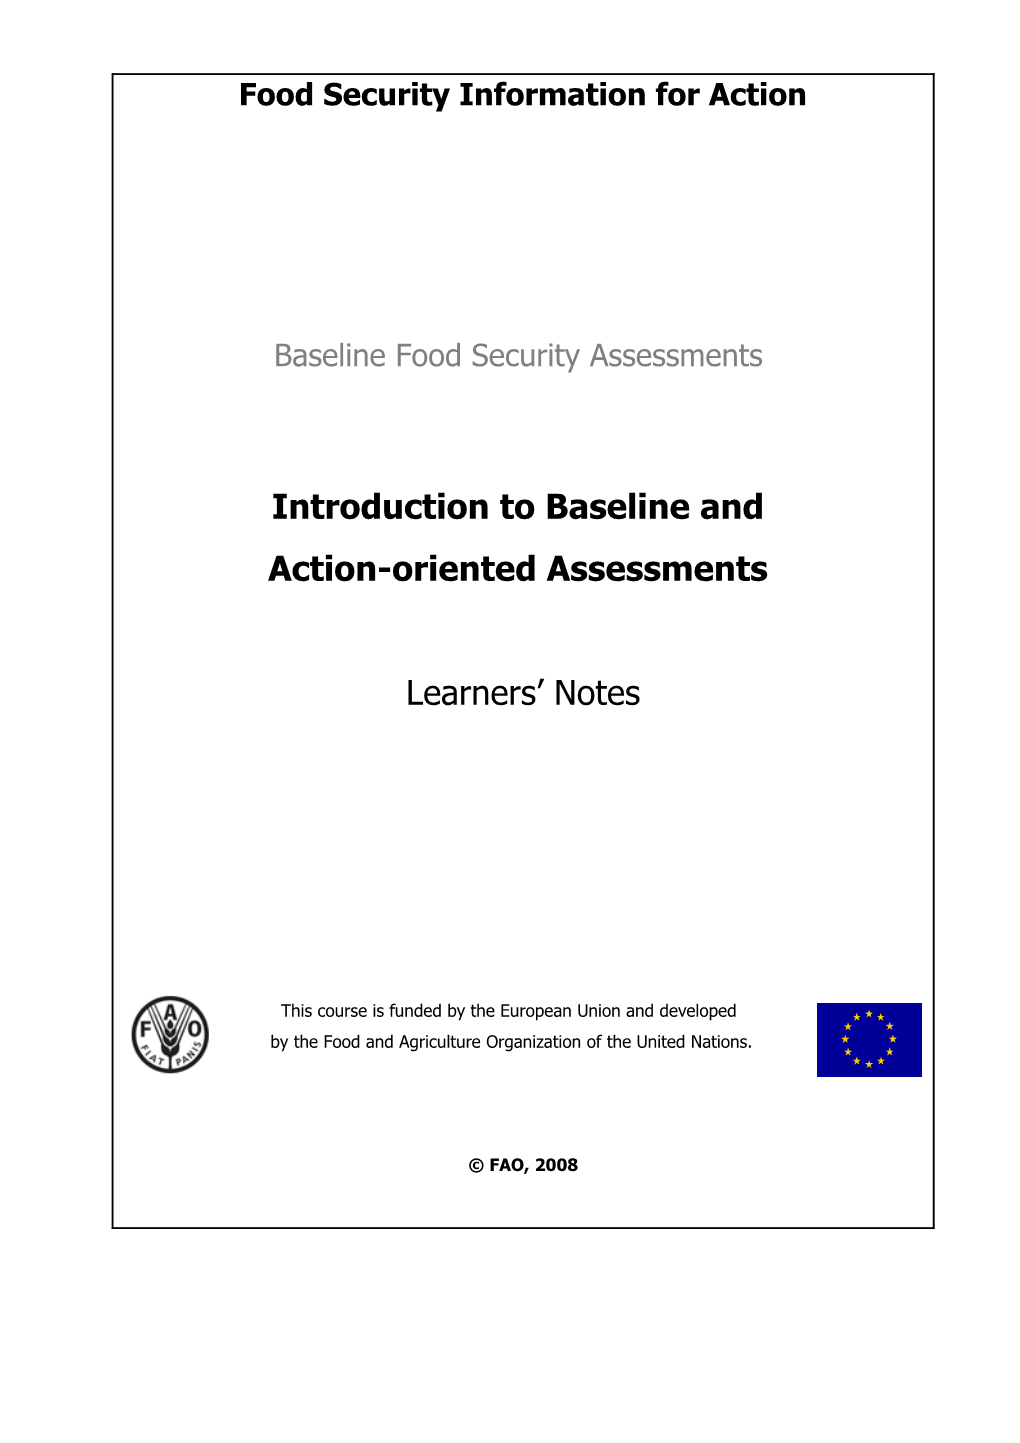 Course: Baseline Food Security Assessments